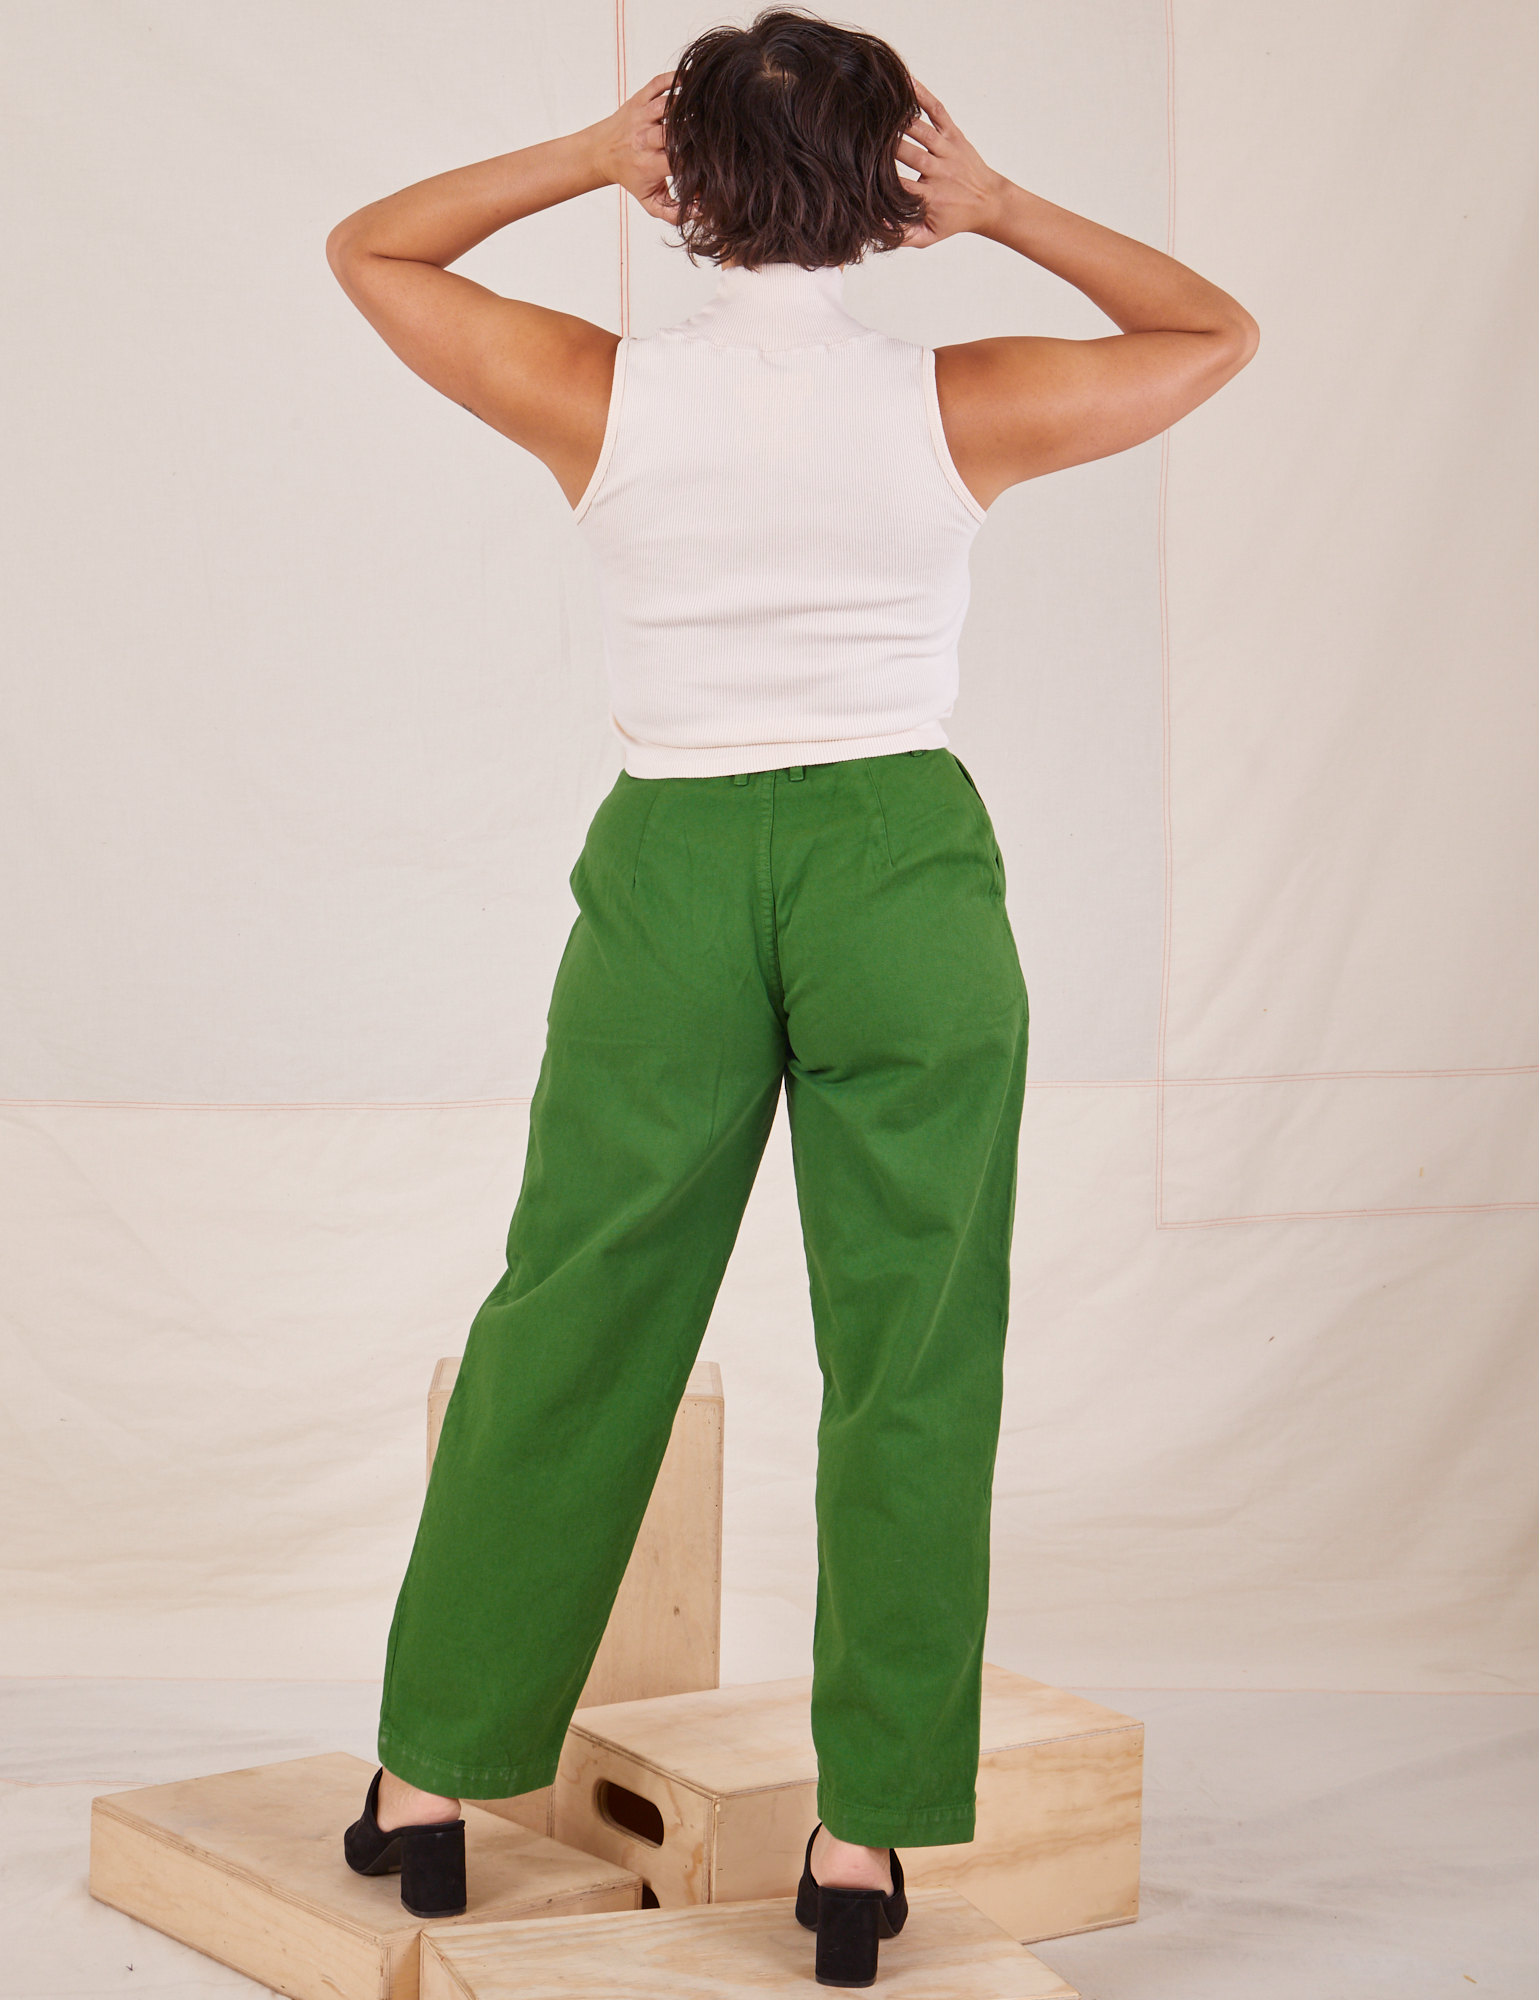 Back view of Heavyweight Trousers in Lawn Green and Sleeveless Turtleneck in vintage tee off-white worn by Tiara